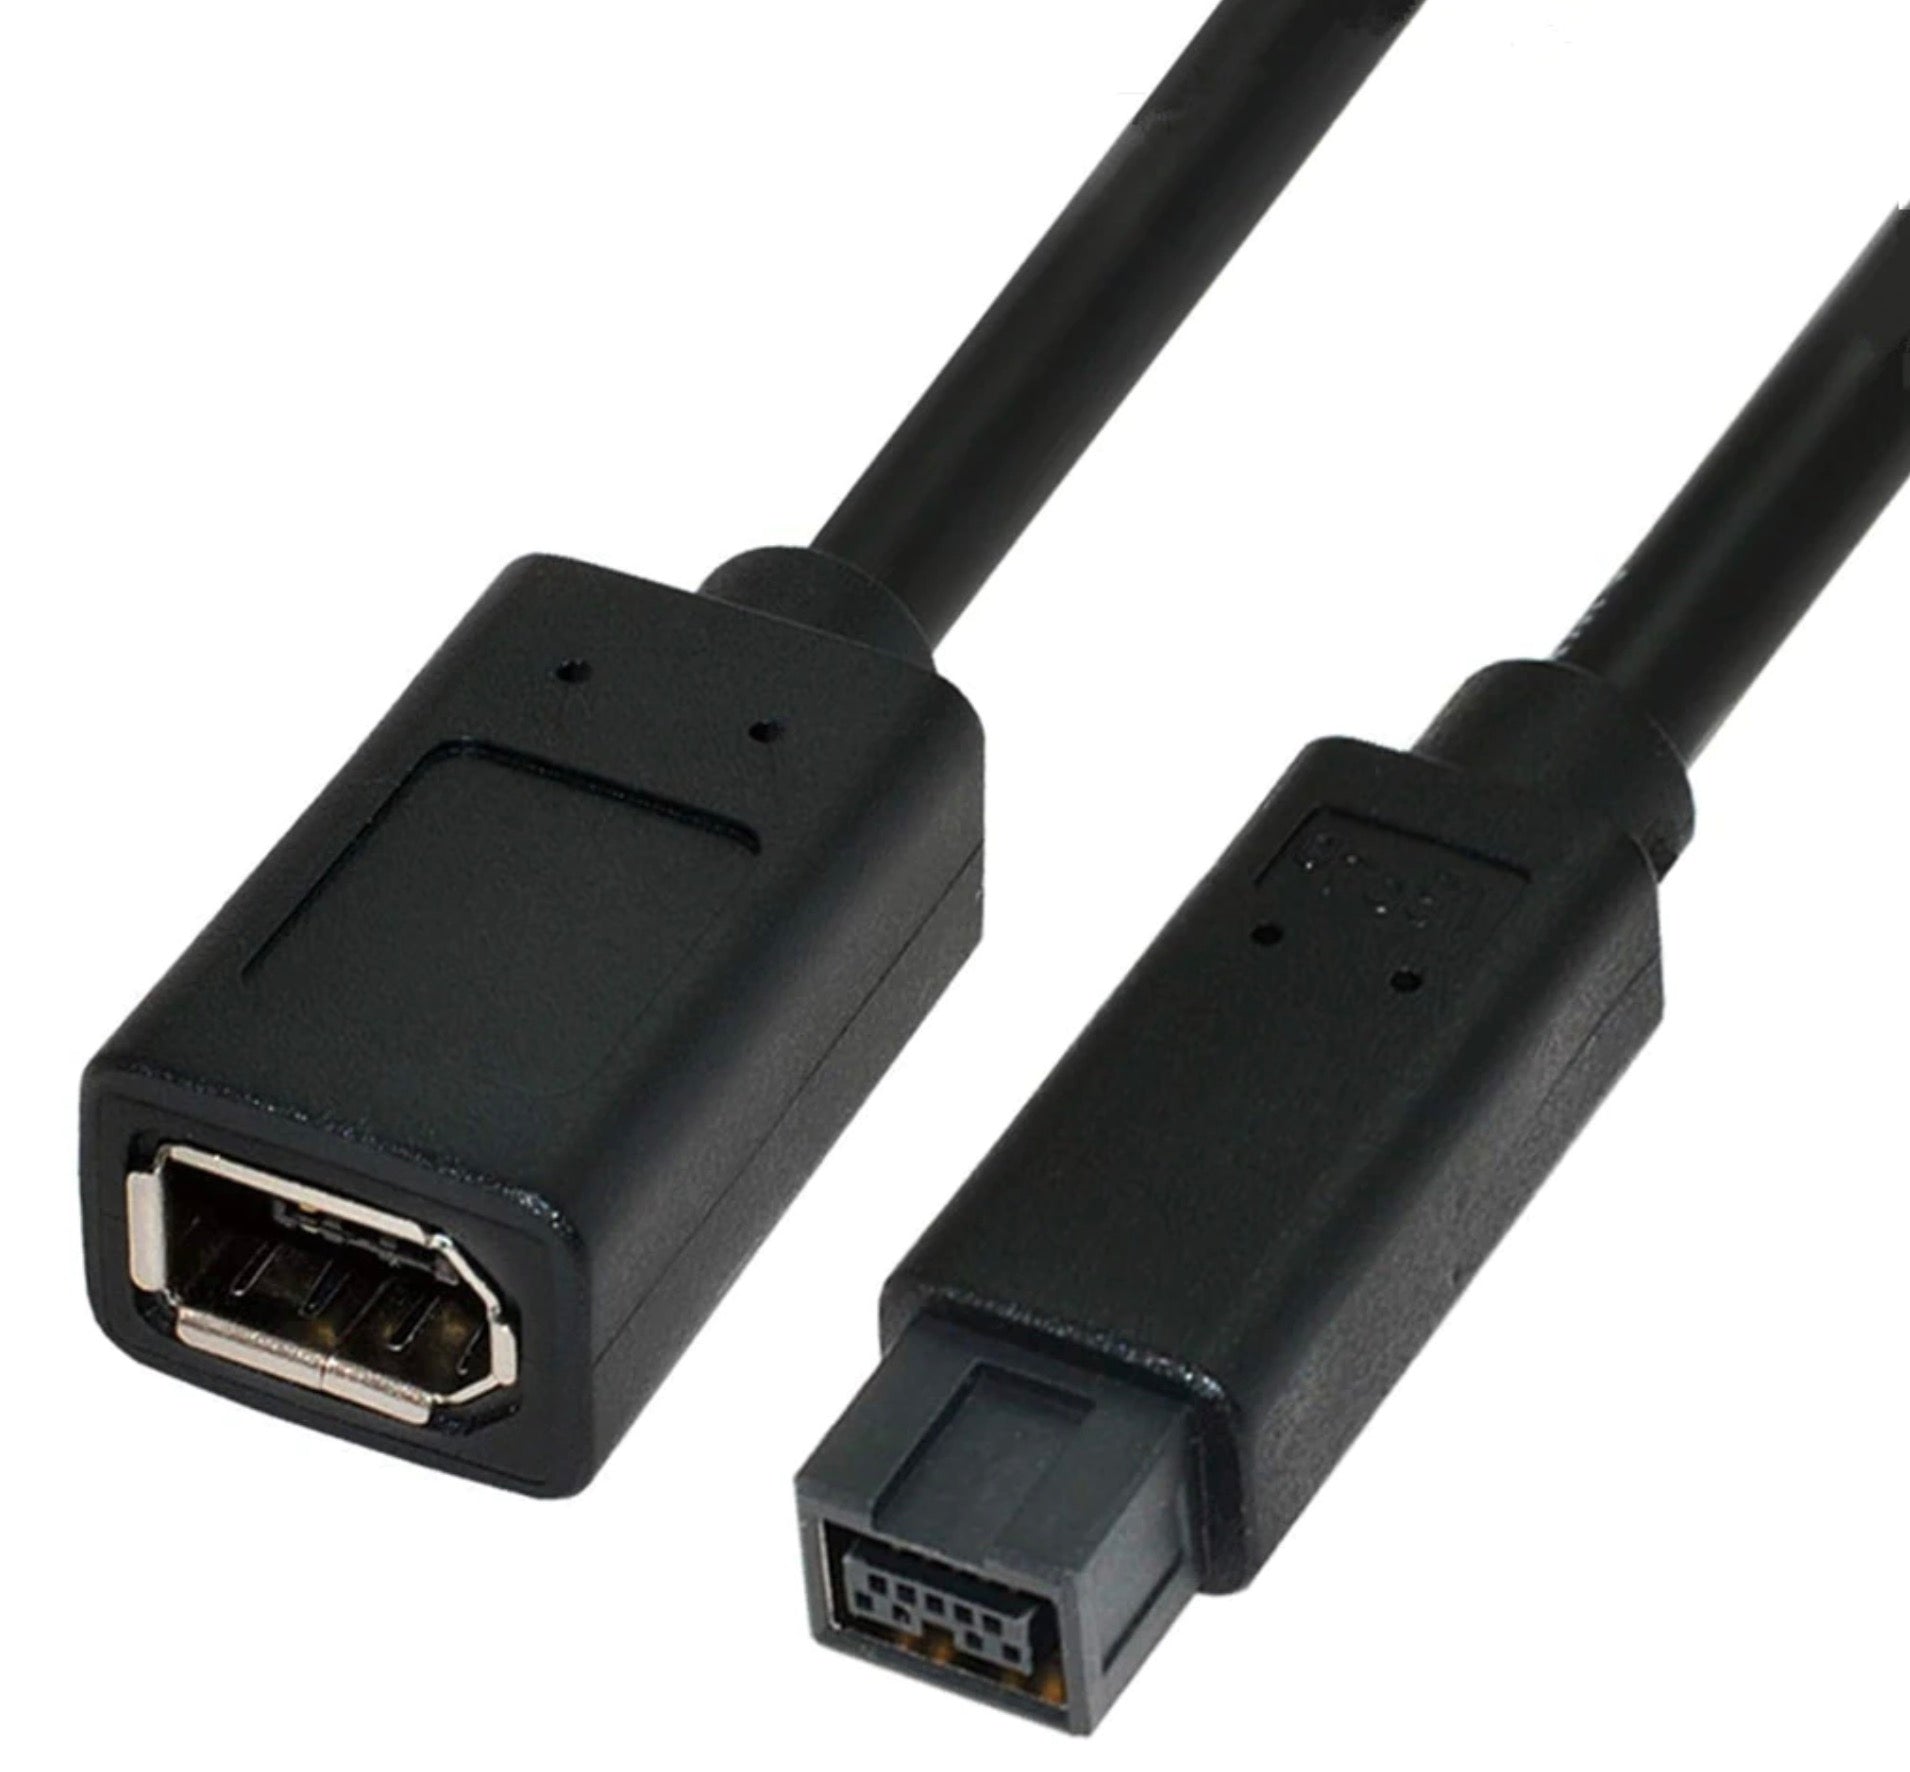 FireWire 400/800 6-Pin Female to 9-Pin Male IEEE1394a 1394b 400 to 800 Cable